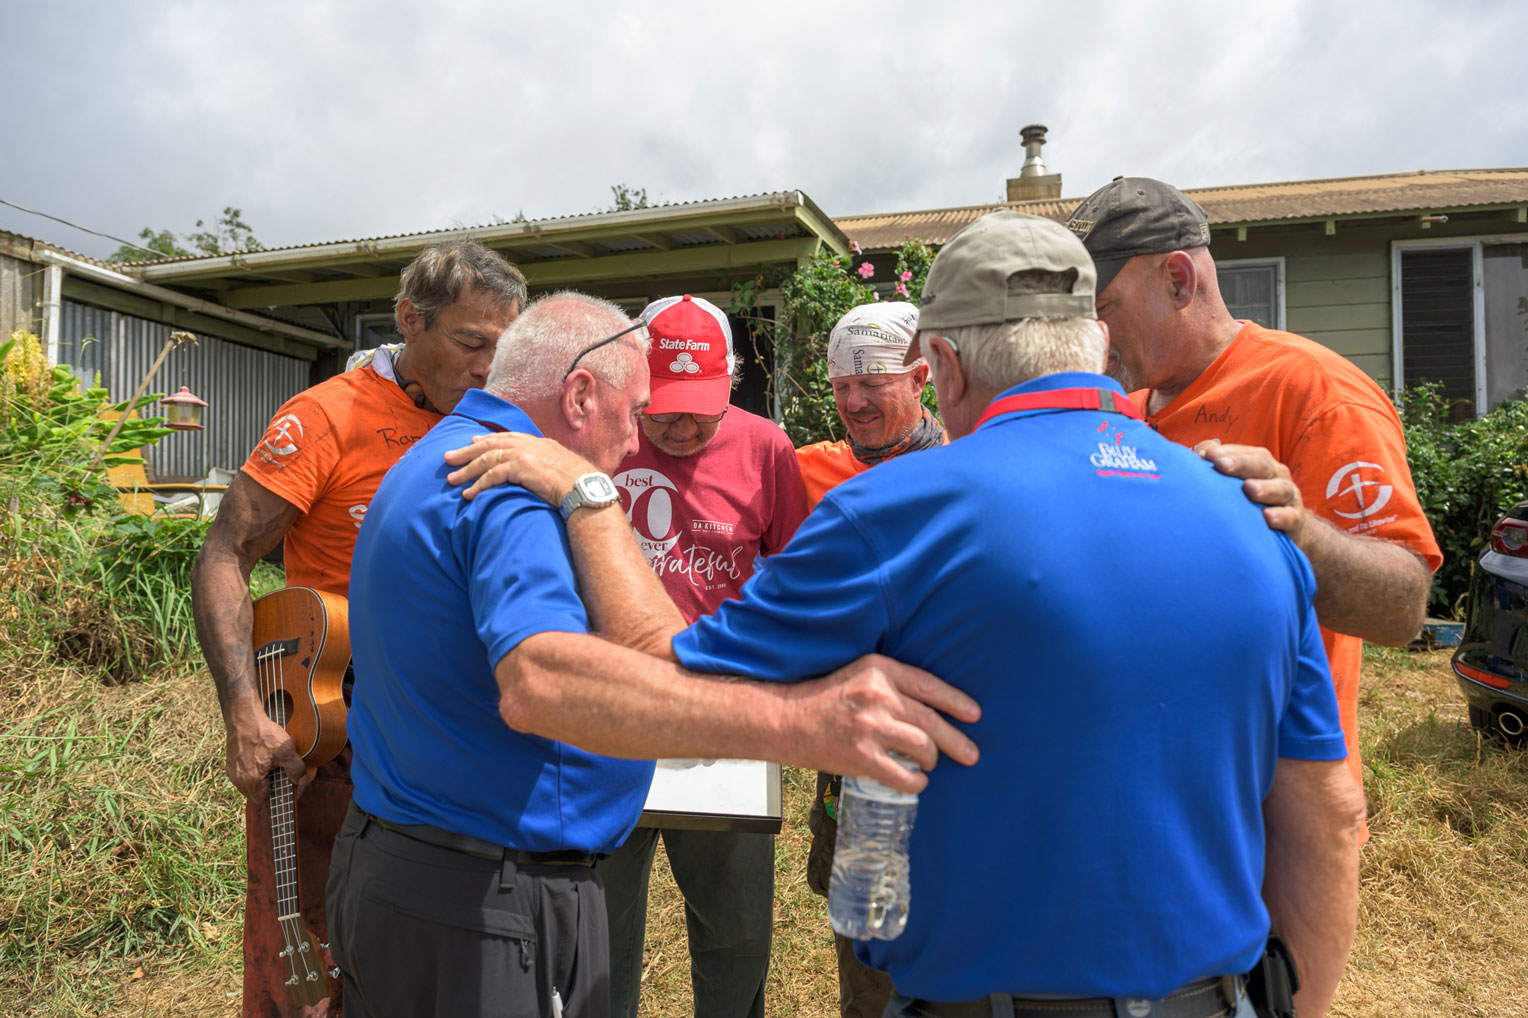 Billy Graham chaplains prayed with more than 900 Maui residents.